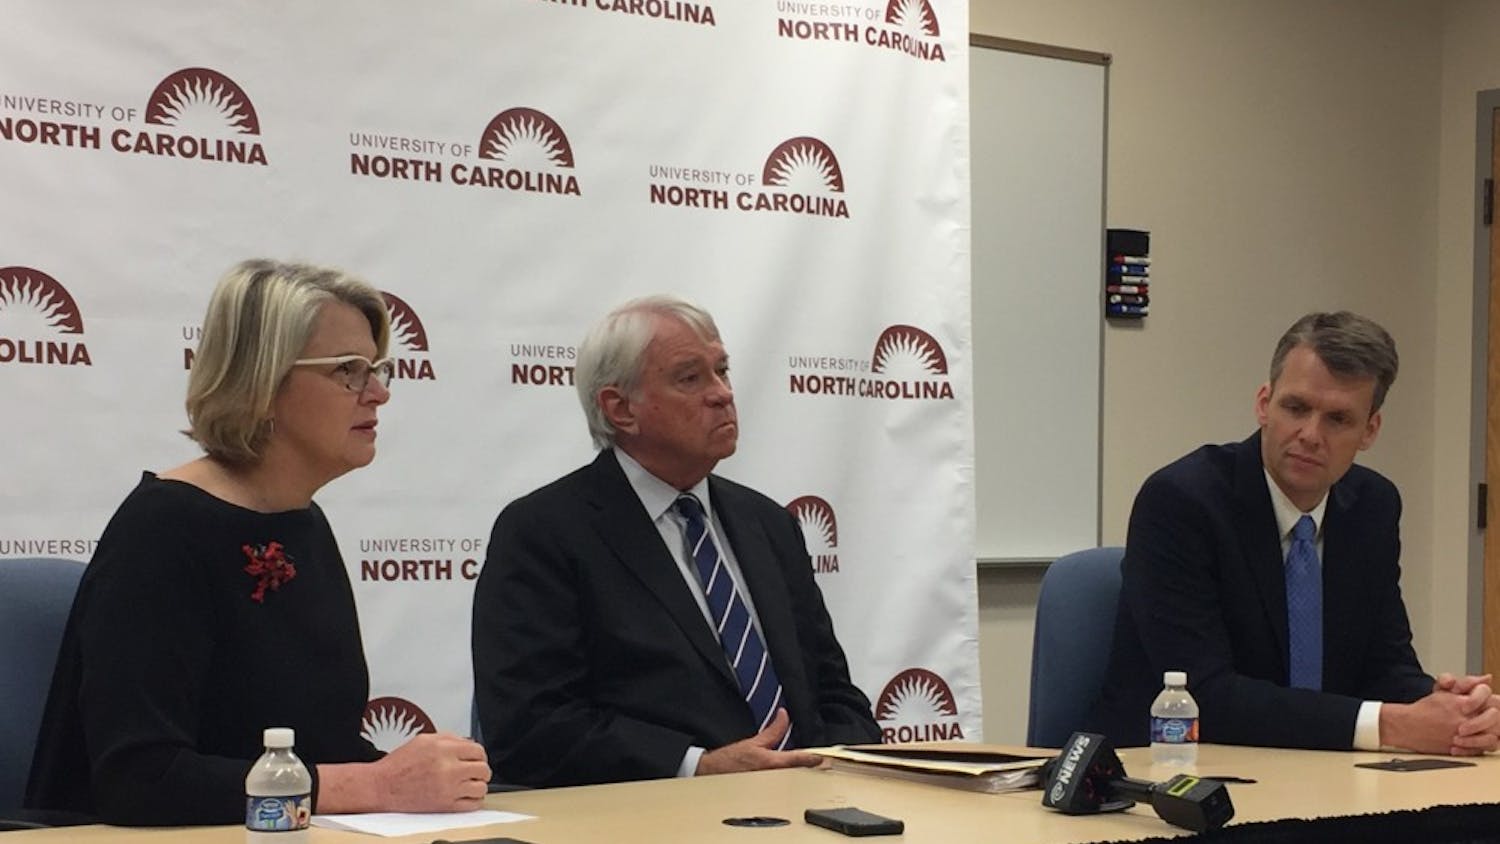 Spellings, BOG Chairperson Lou Bissette and UNC-system general counsel Thomas Shanahan speak to reporters in a press conference.